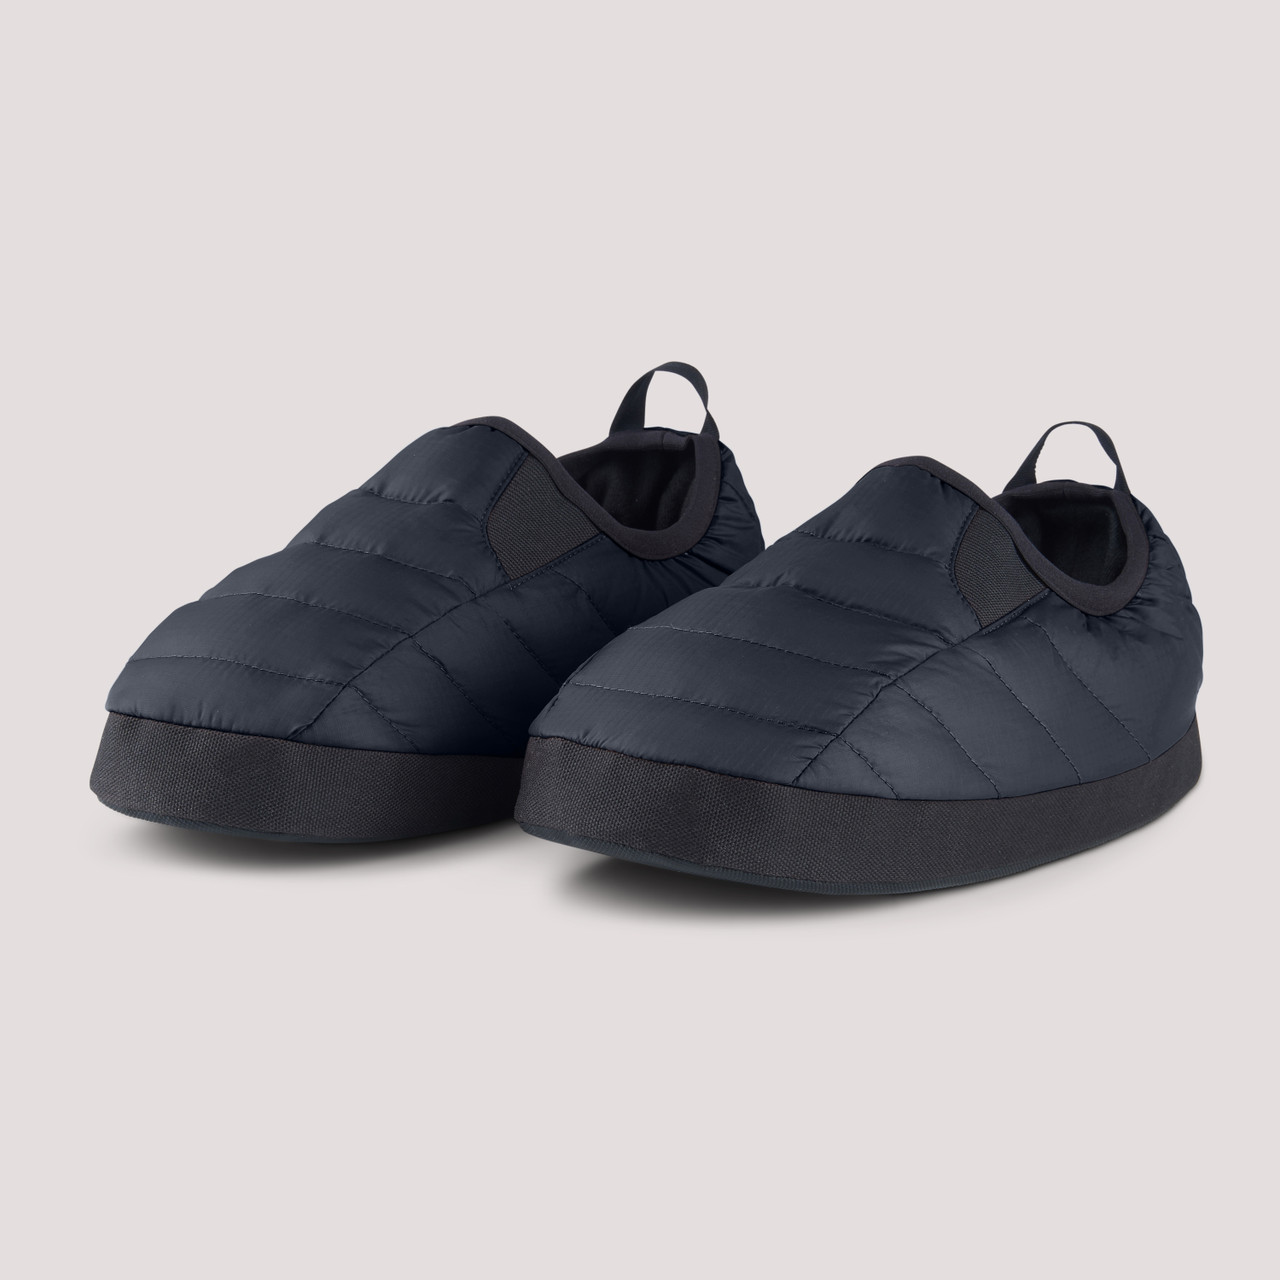 These Comfy Slip-on Shoes Are 67% Off at